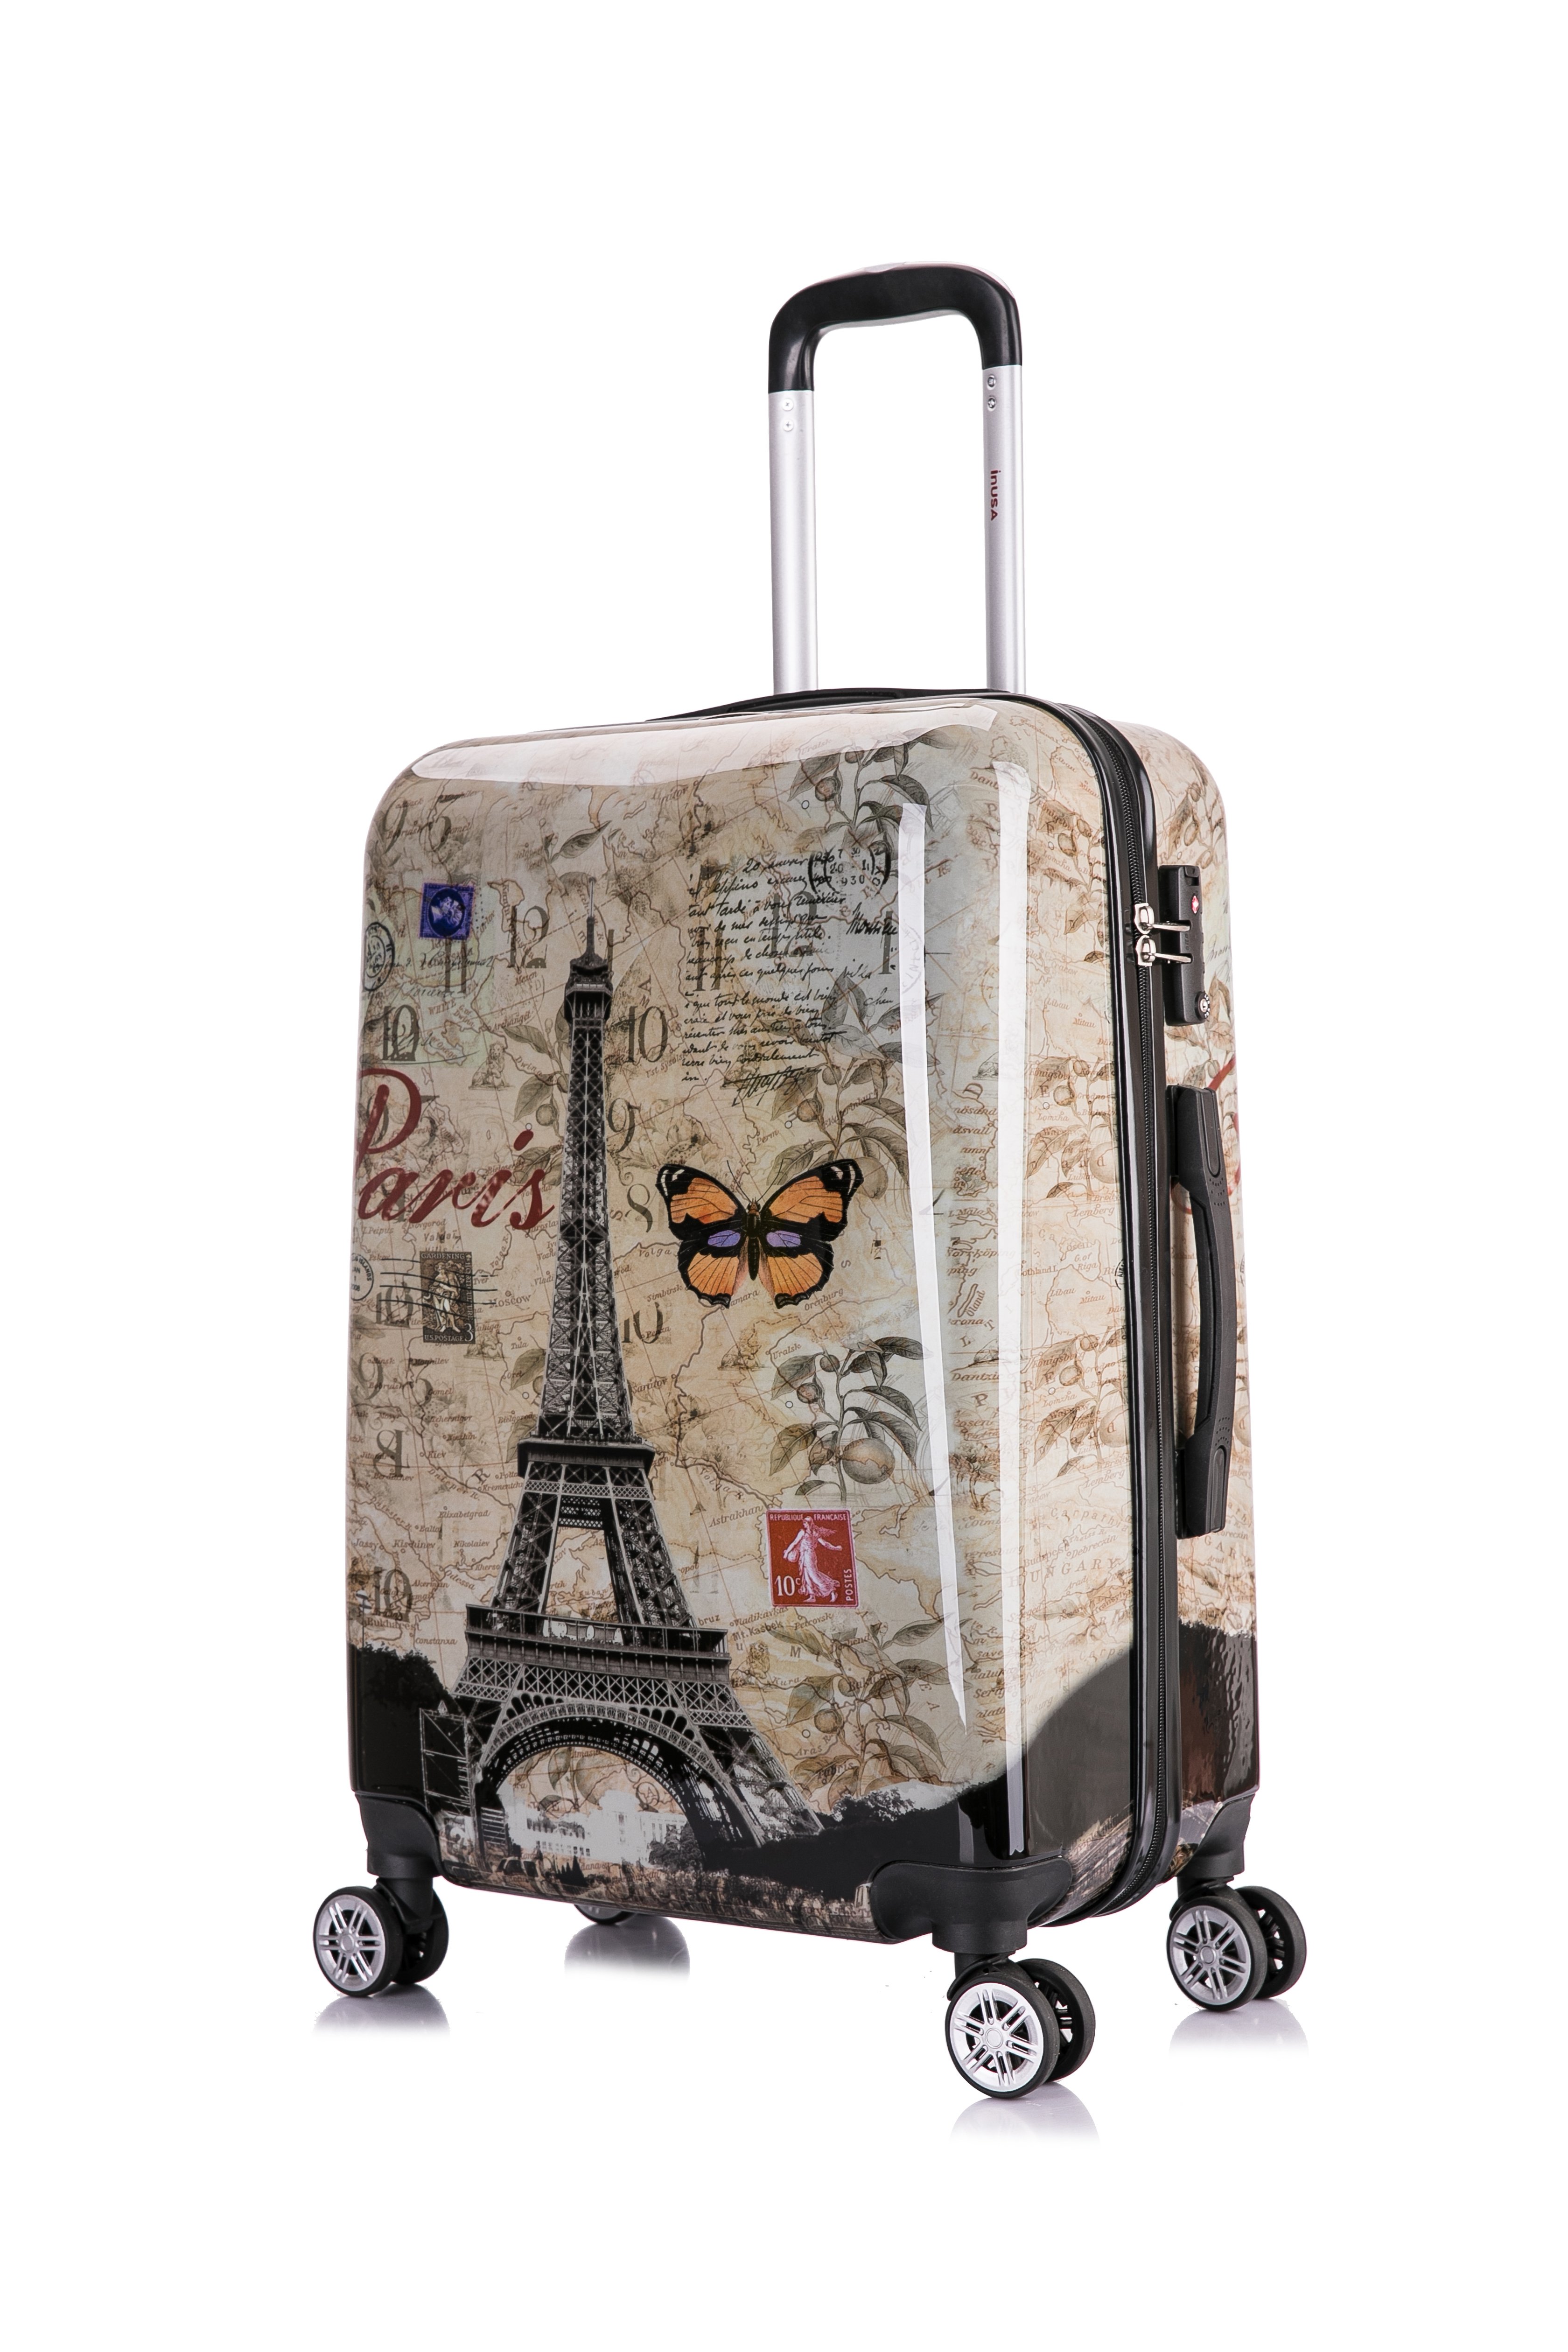 InUSA Print 24" Hardside Checked Luggage with Spinner Wheels, Handle and Trolley, Paris - image 1 of 15